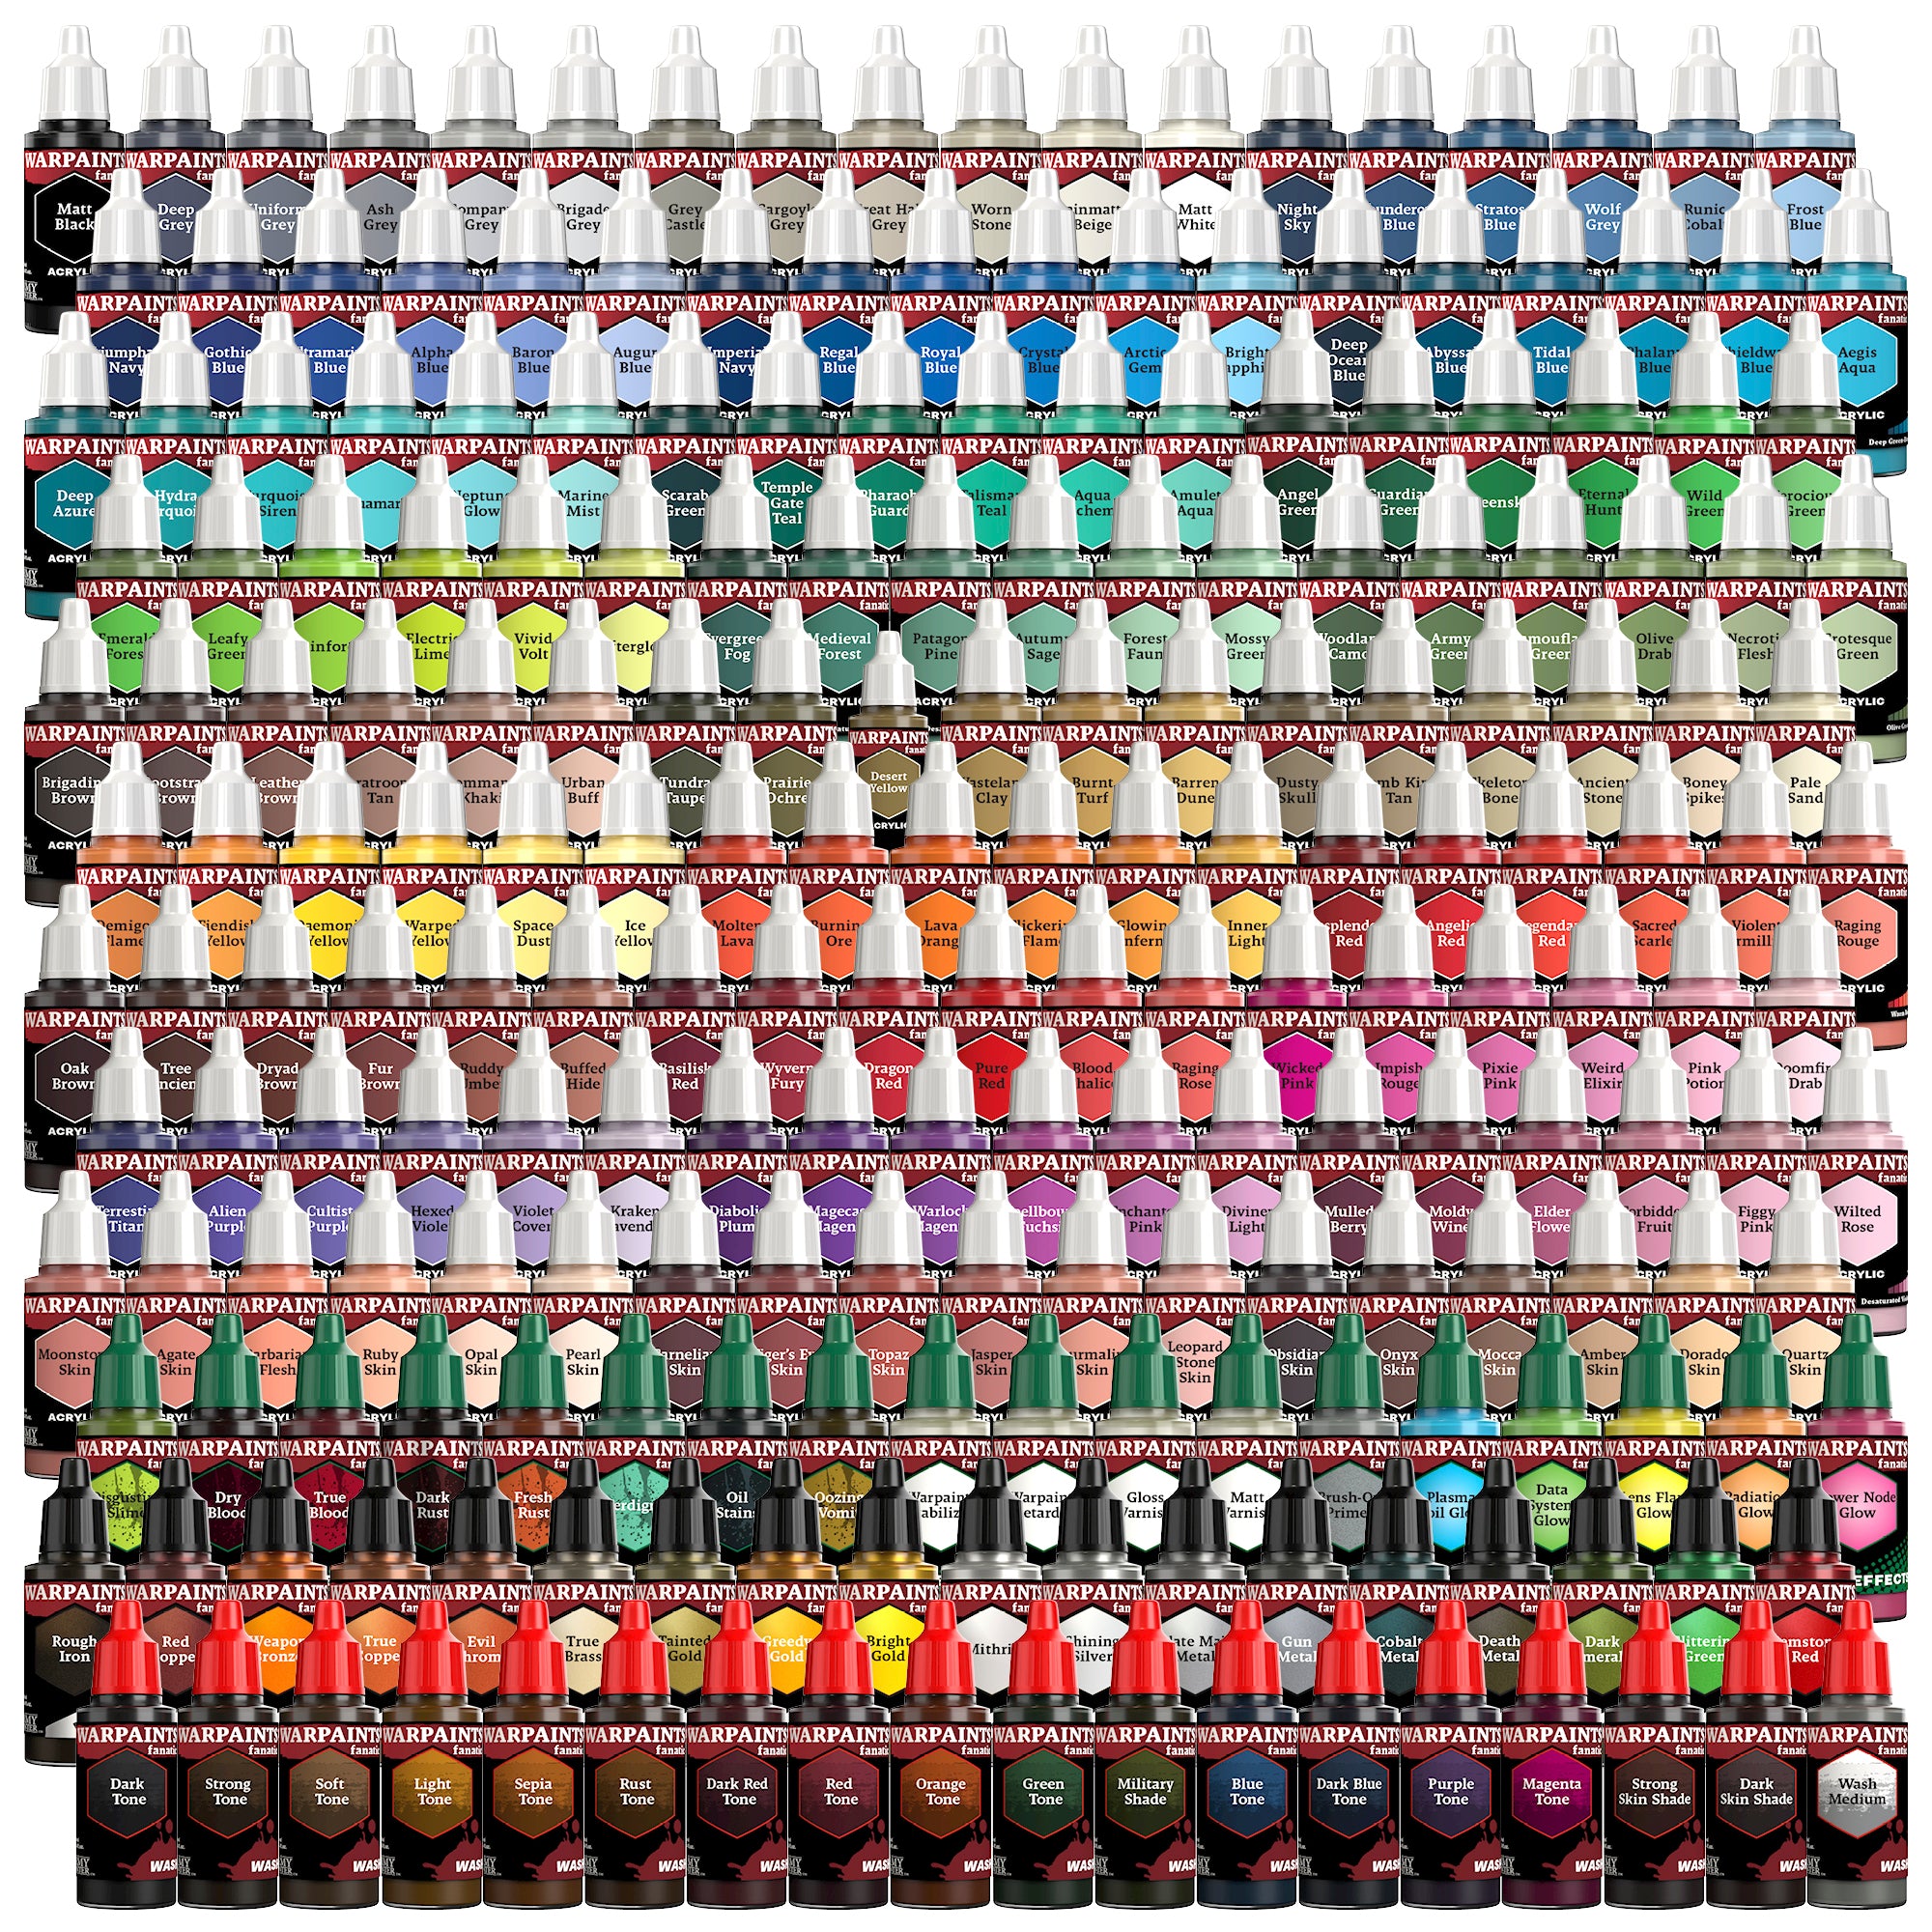 Warpaints Fanatic: All Colours by The Army Painter - Issuu